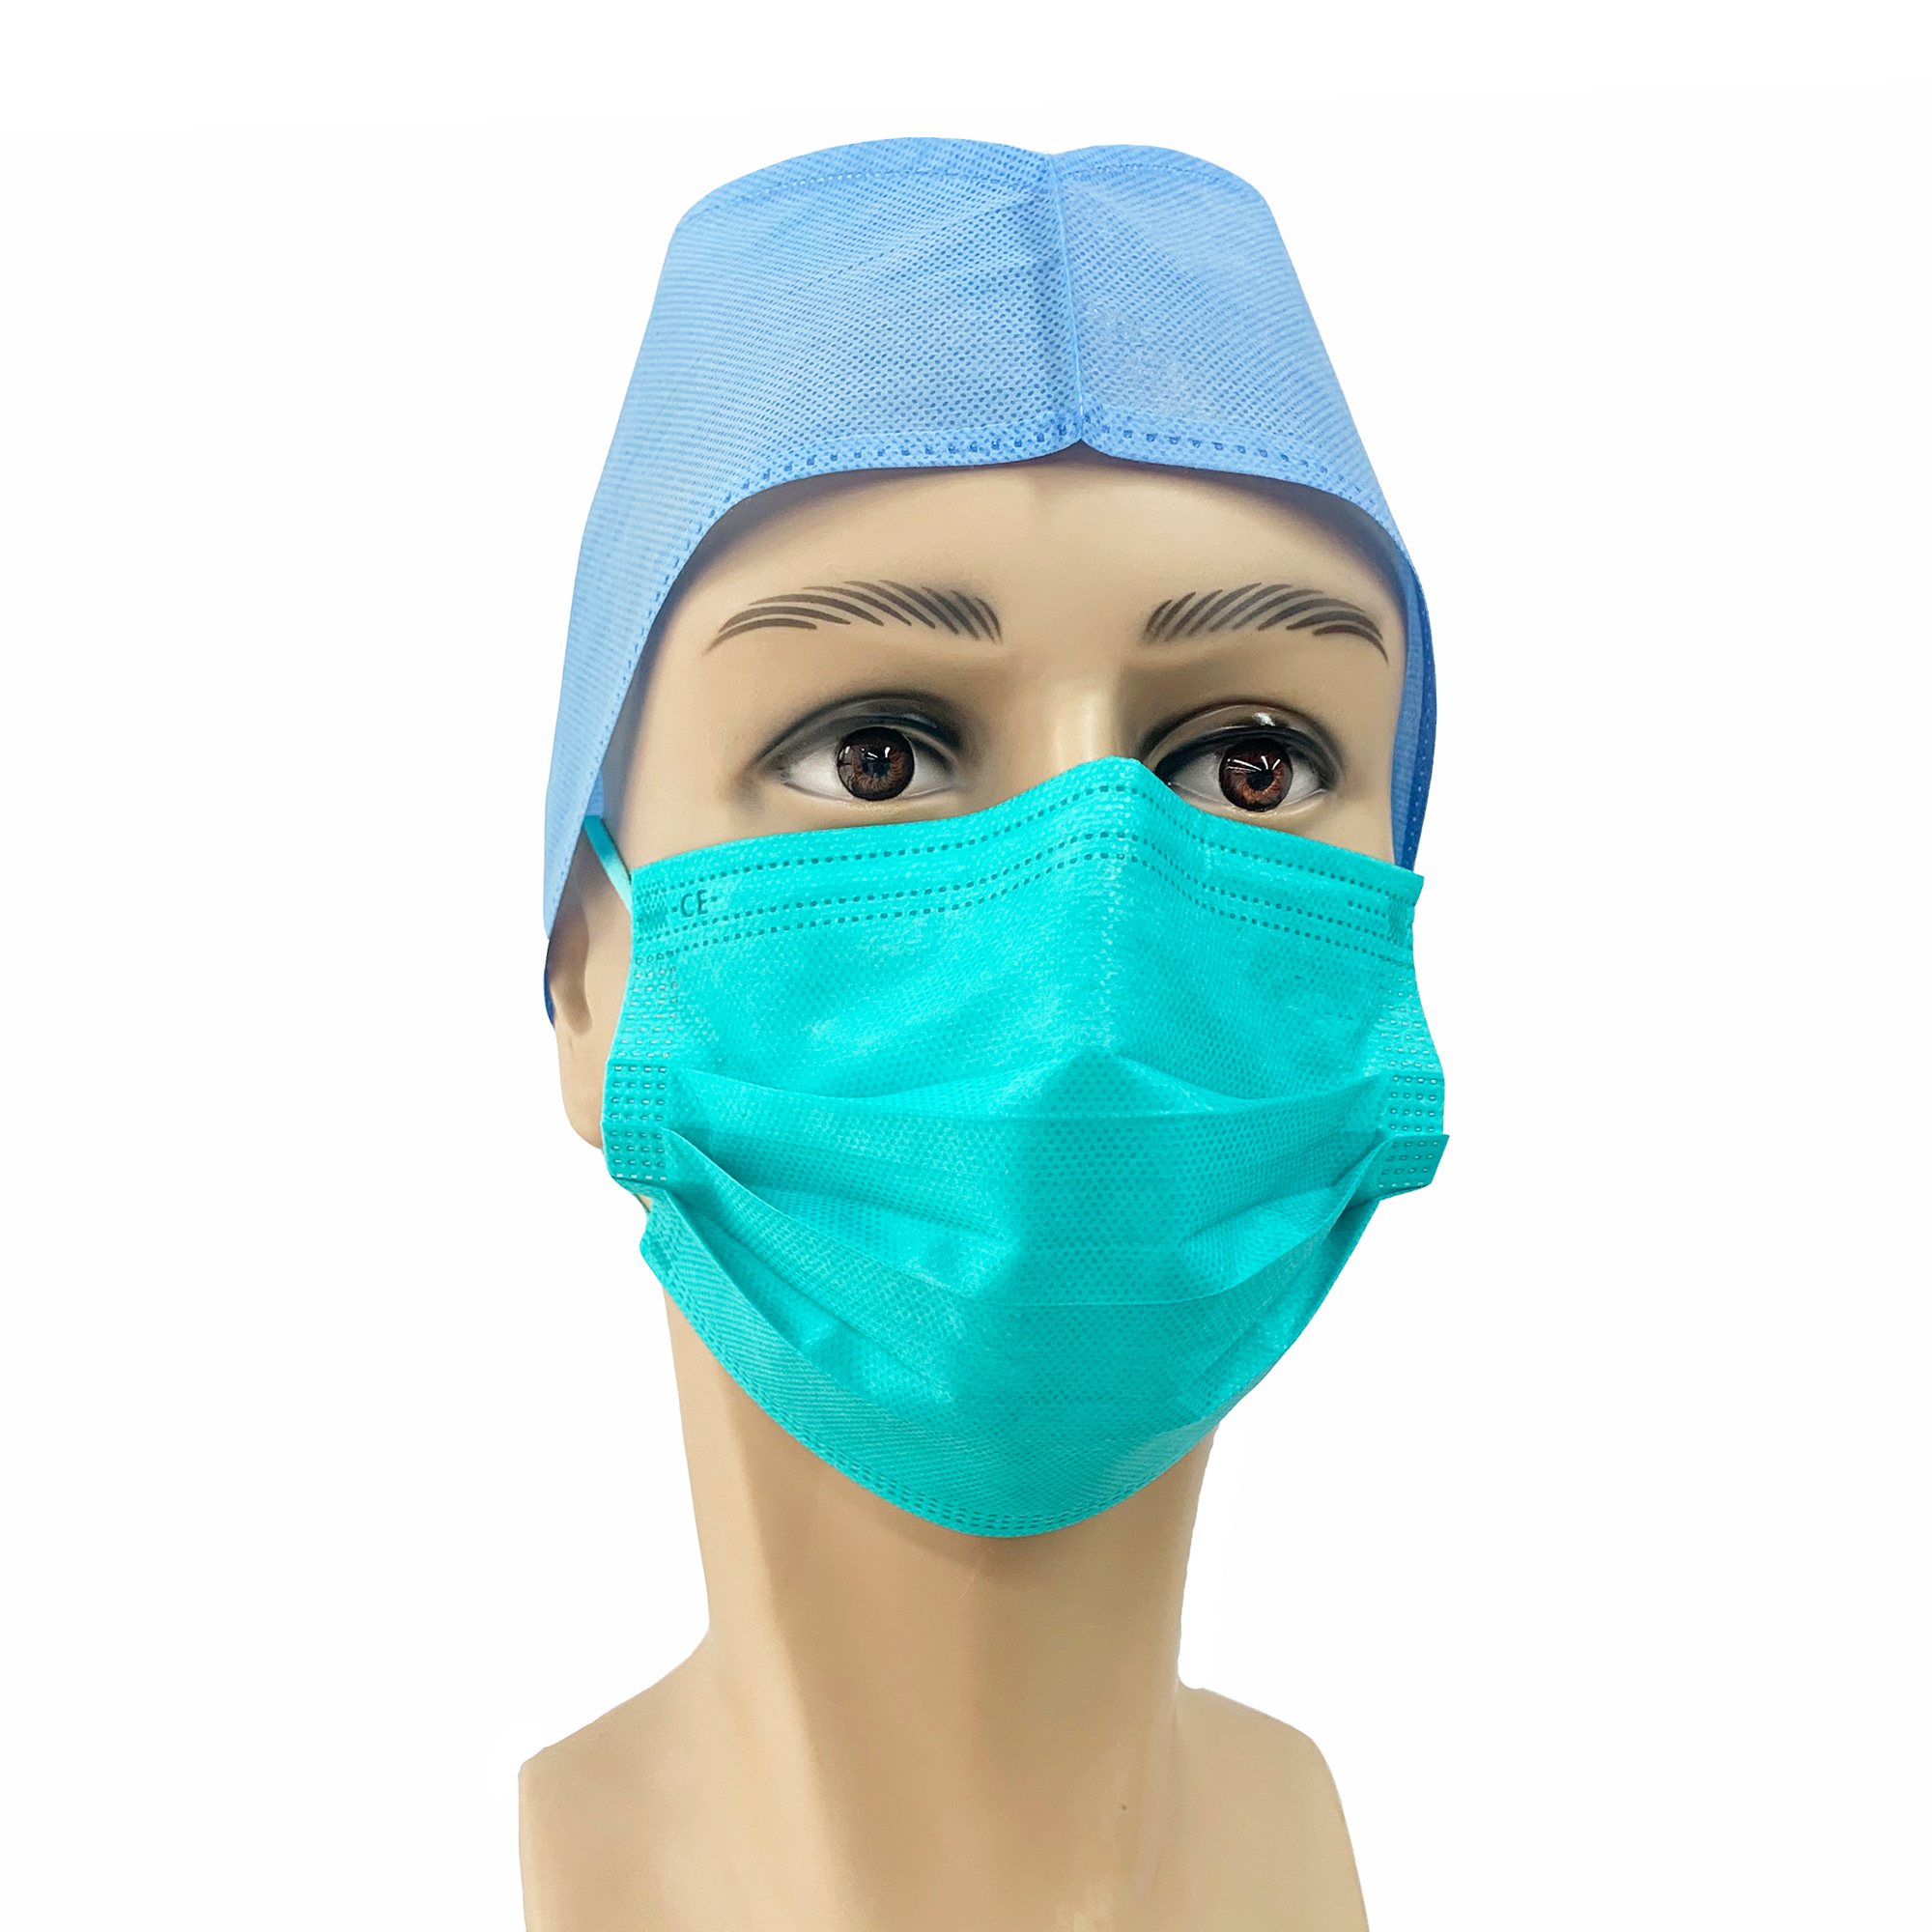 Level 3 Face Mask with 3ply Surgical Face Mask Disposable Face Mask with Ear Loops